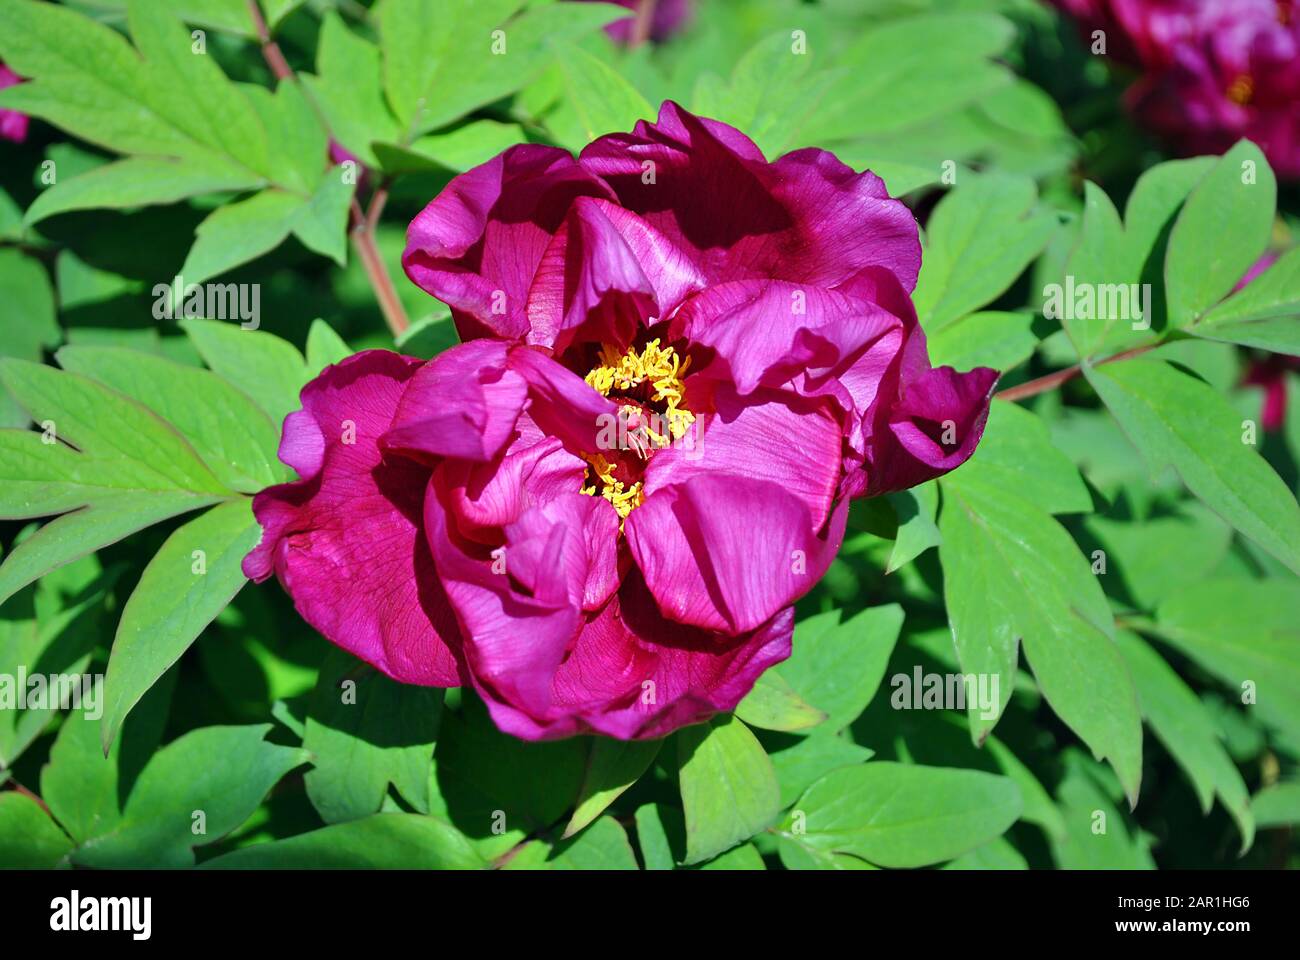 Bright purple peony flowers, close up detail, soft green blurry leaves background Stock Photo